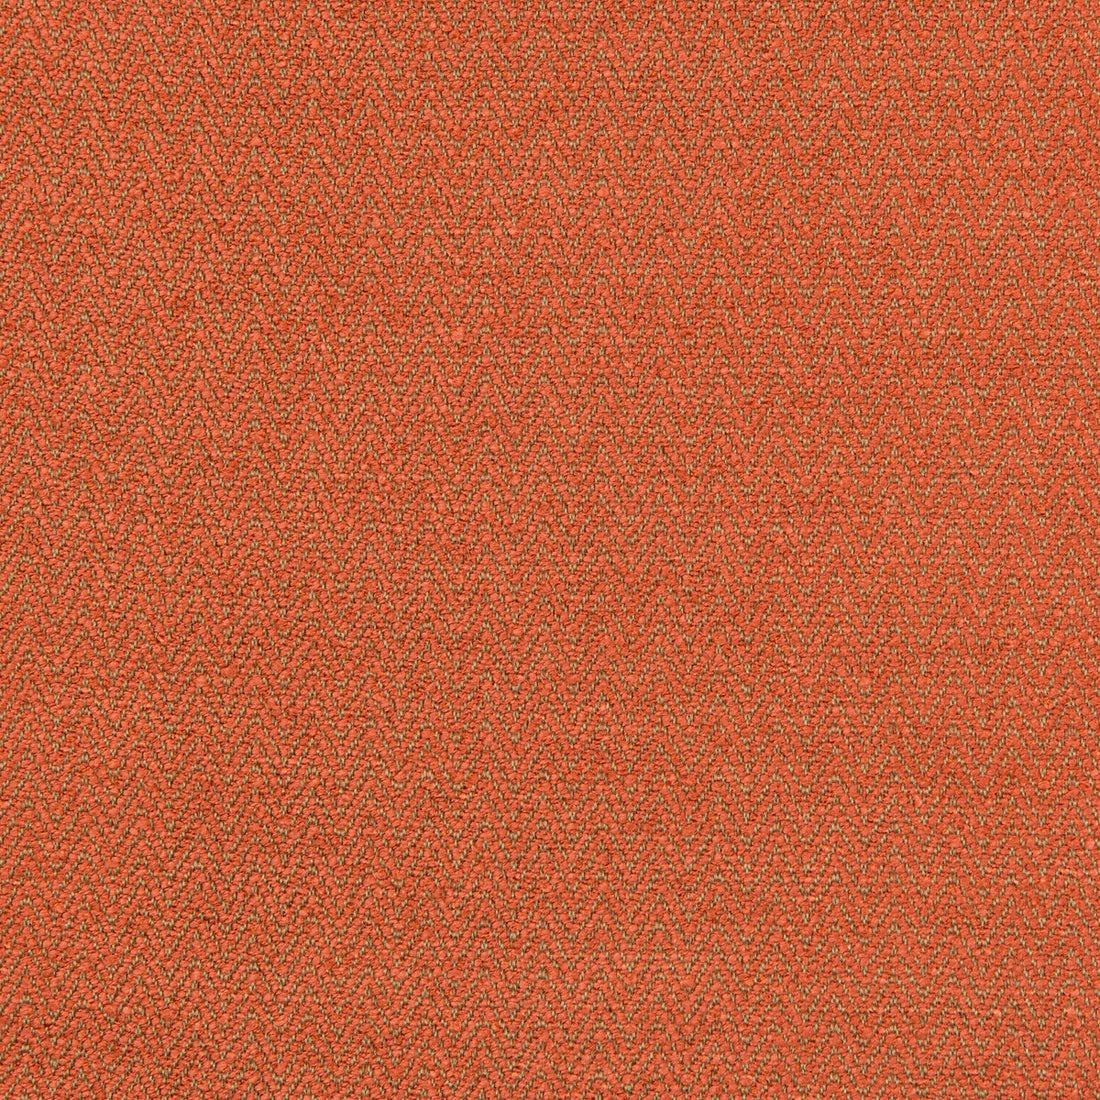 Mohican fabric in cayenne color - pattern 35883.24.0 - by Kravet Contract in the Gis Crypton collection